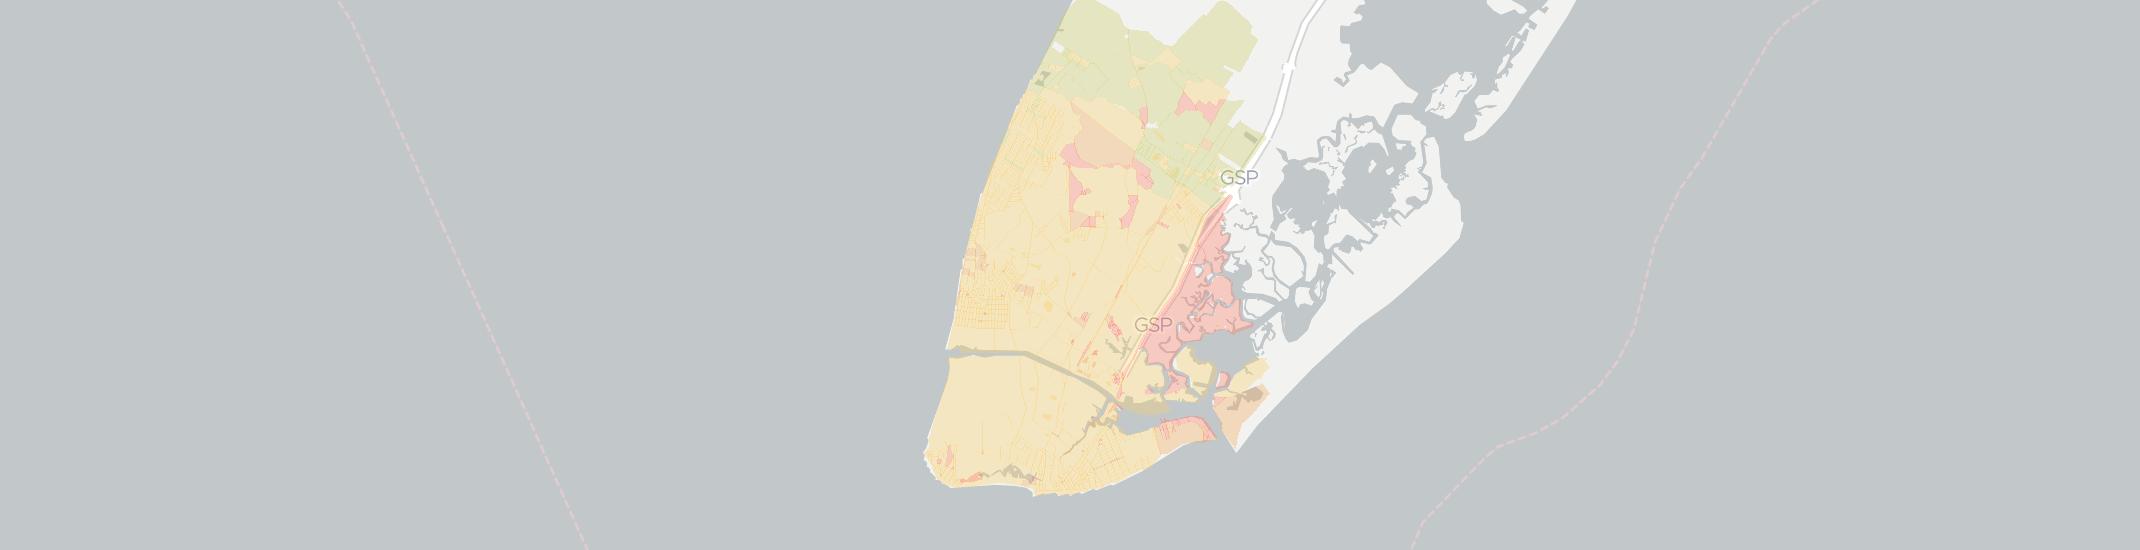 Cape May Internet Competition Map. Click for interactive map.